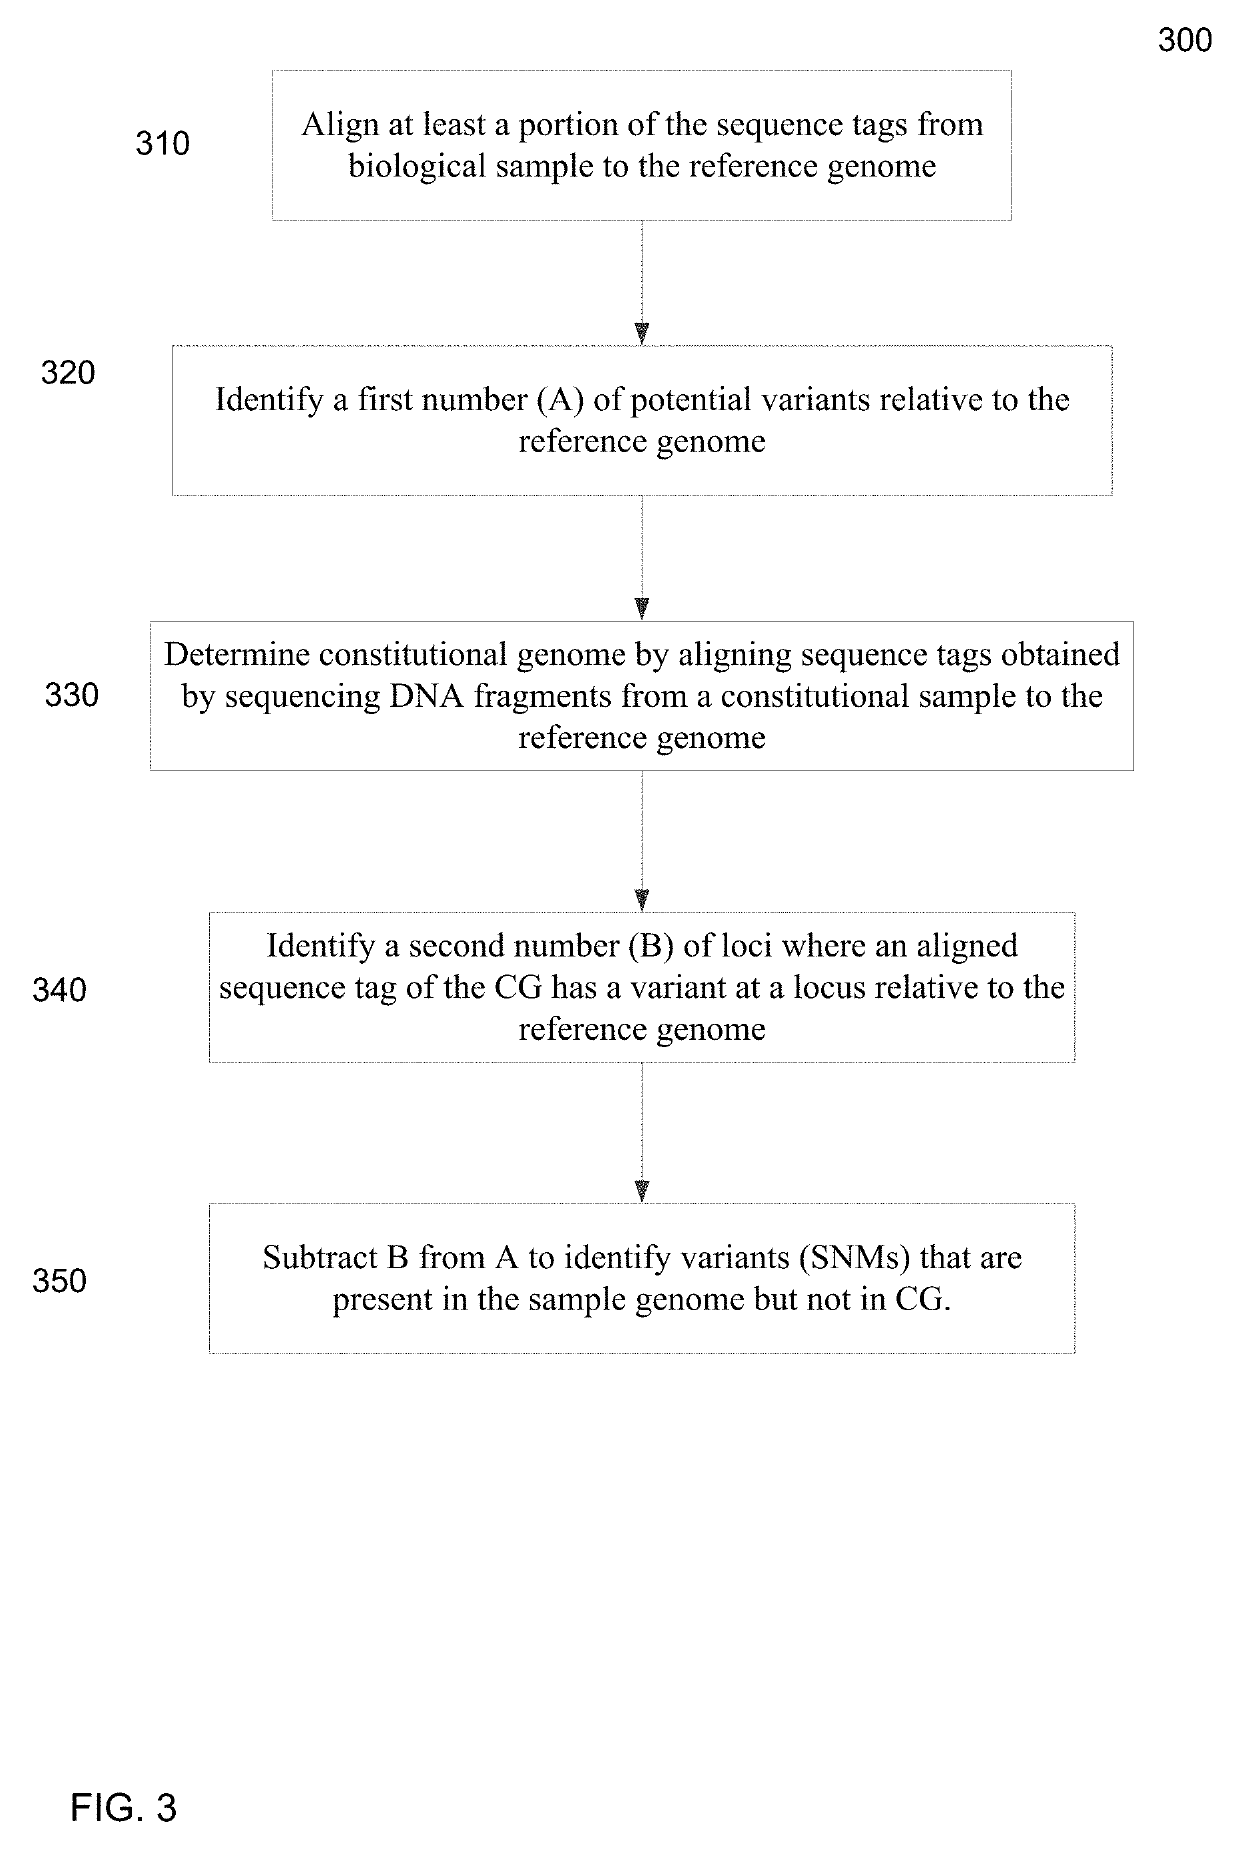 Sequence variant analysis of cell-free DNA for cancer screening